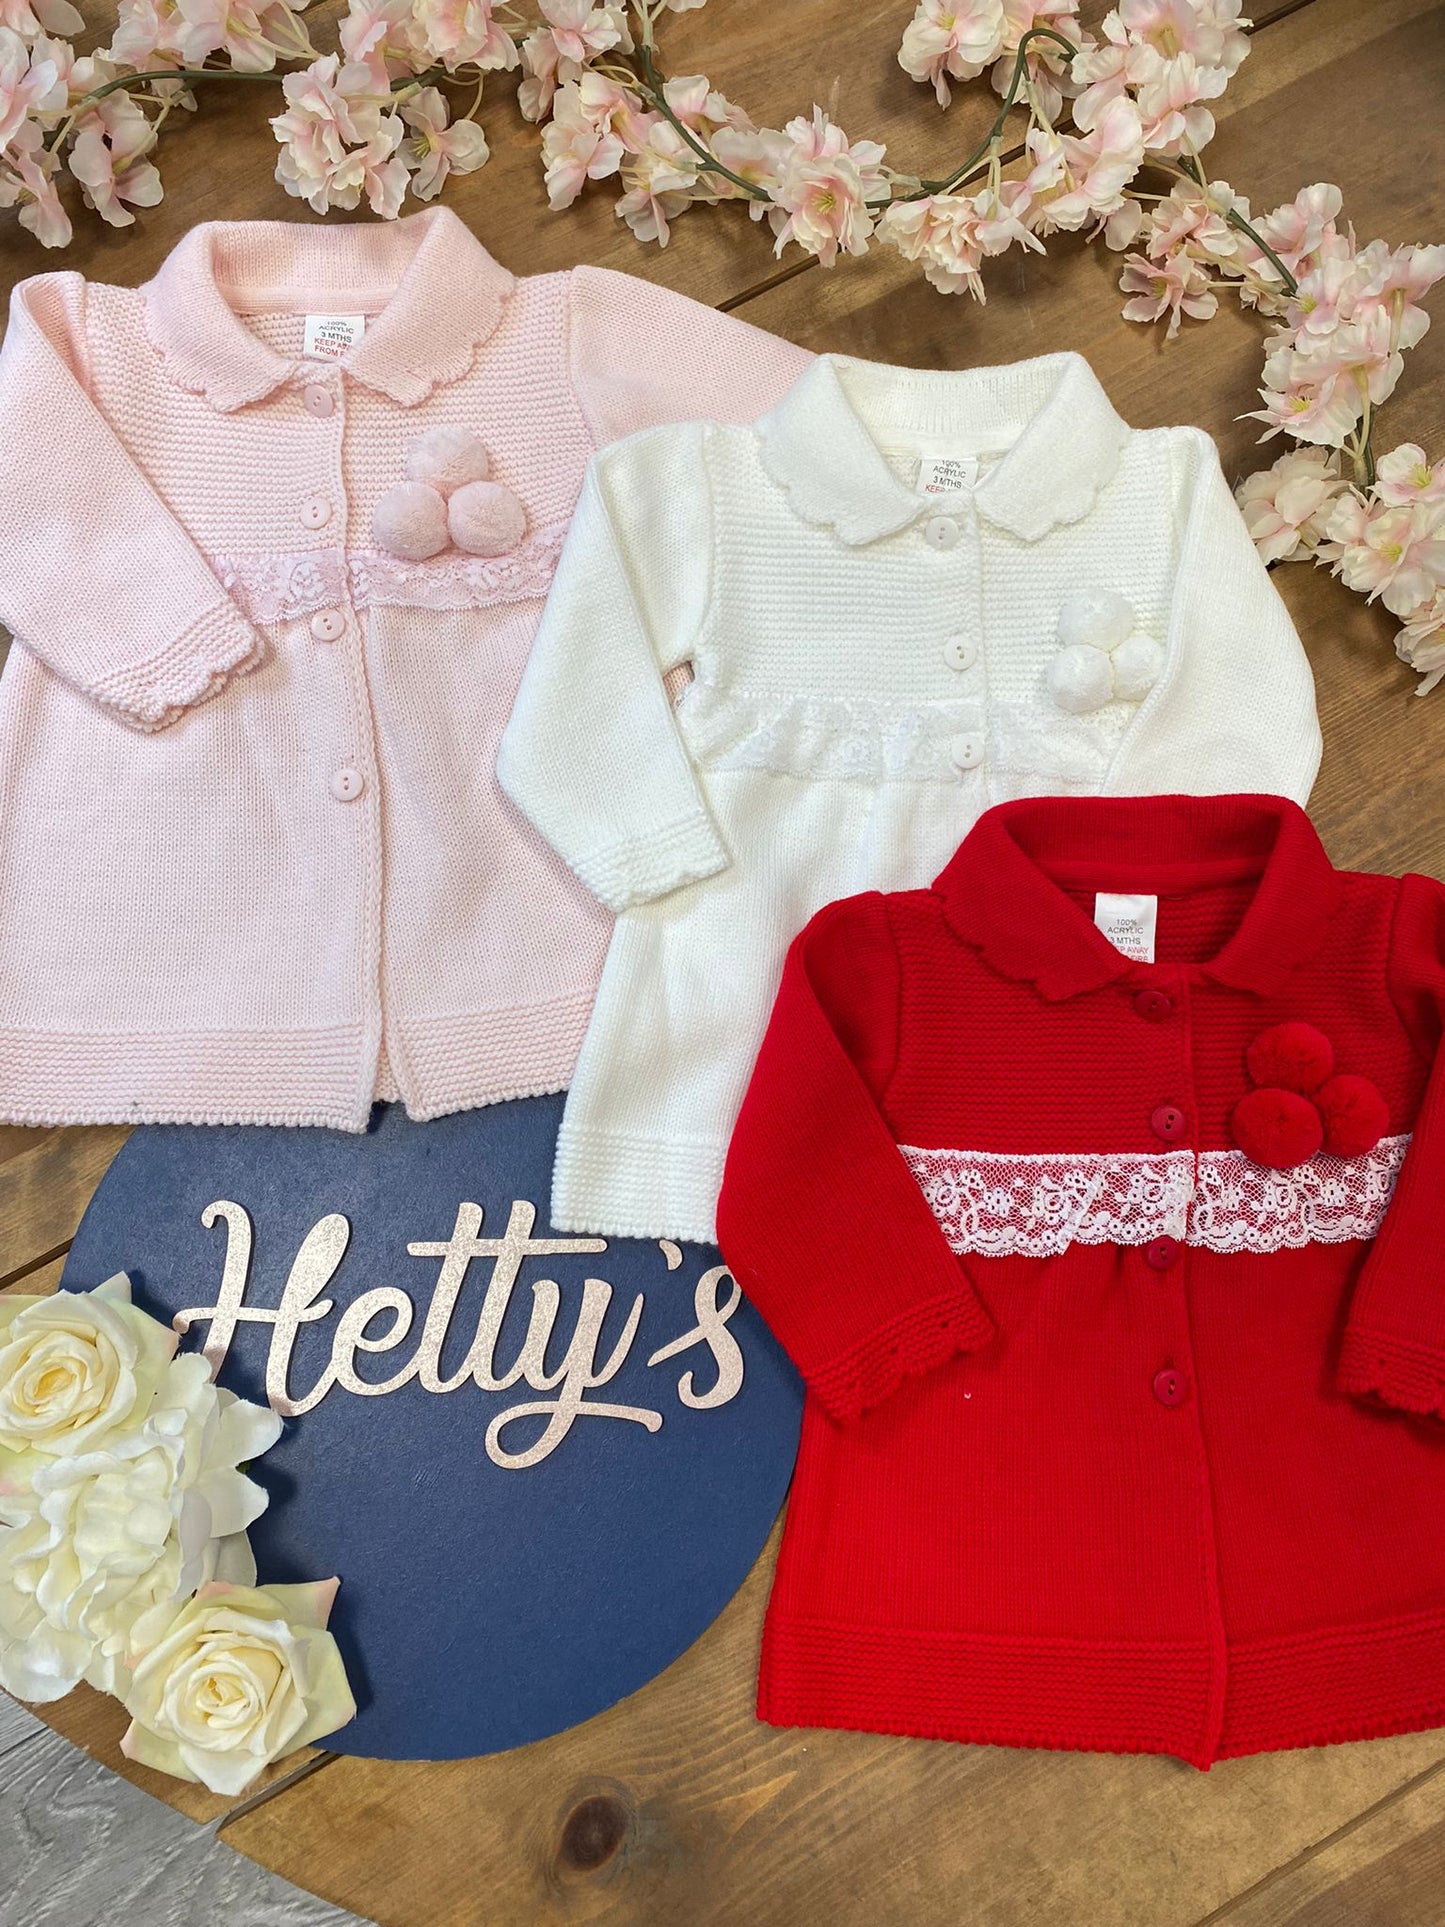 old fashioned baby clothes girl